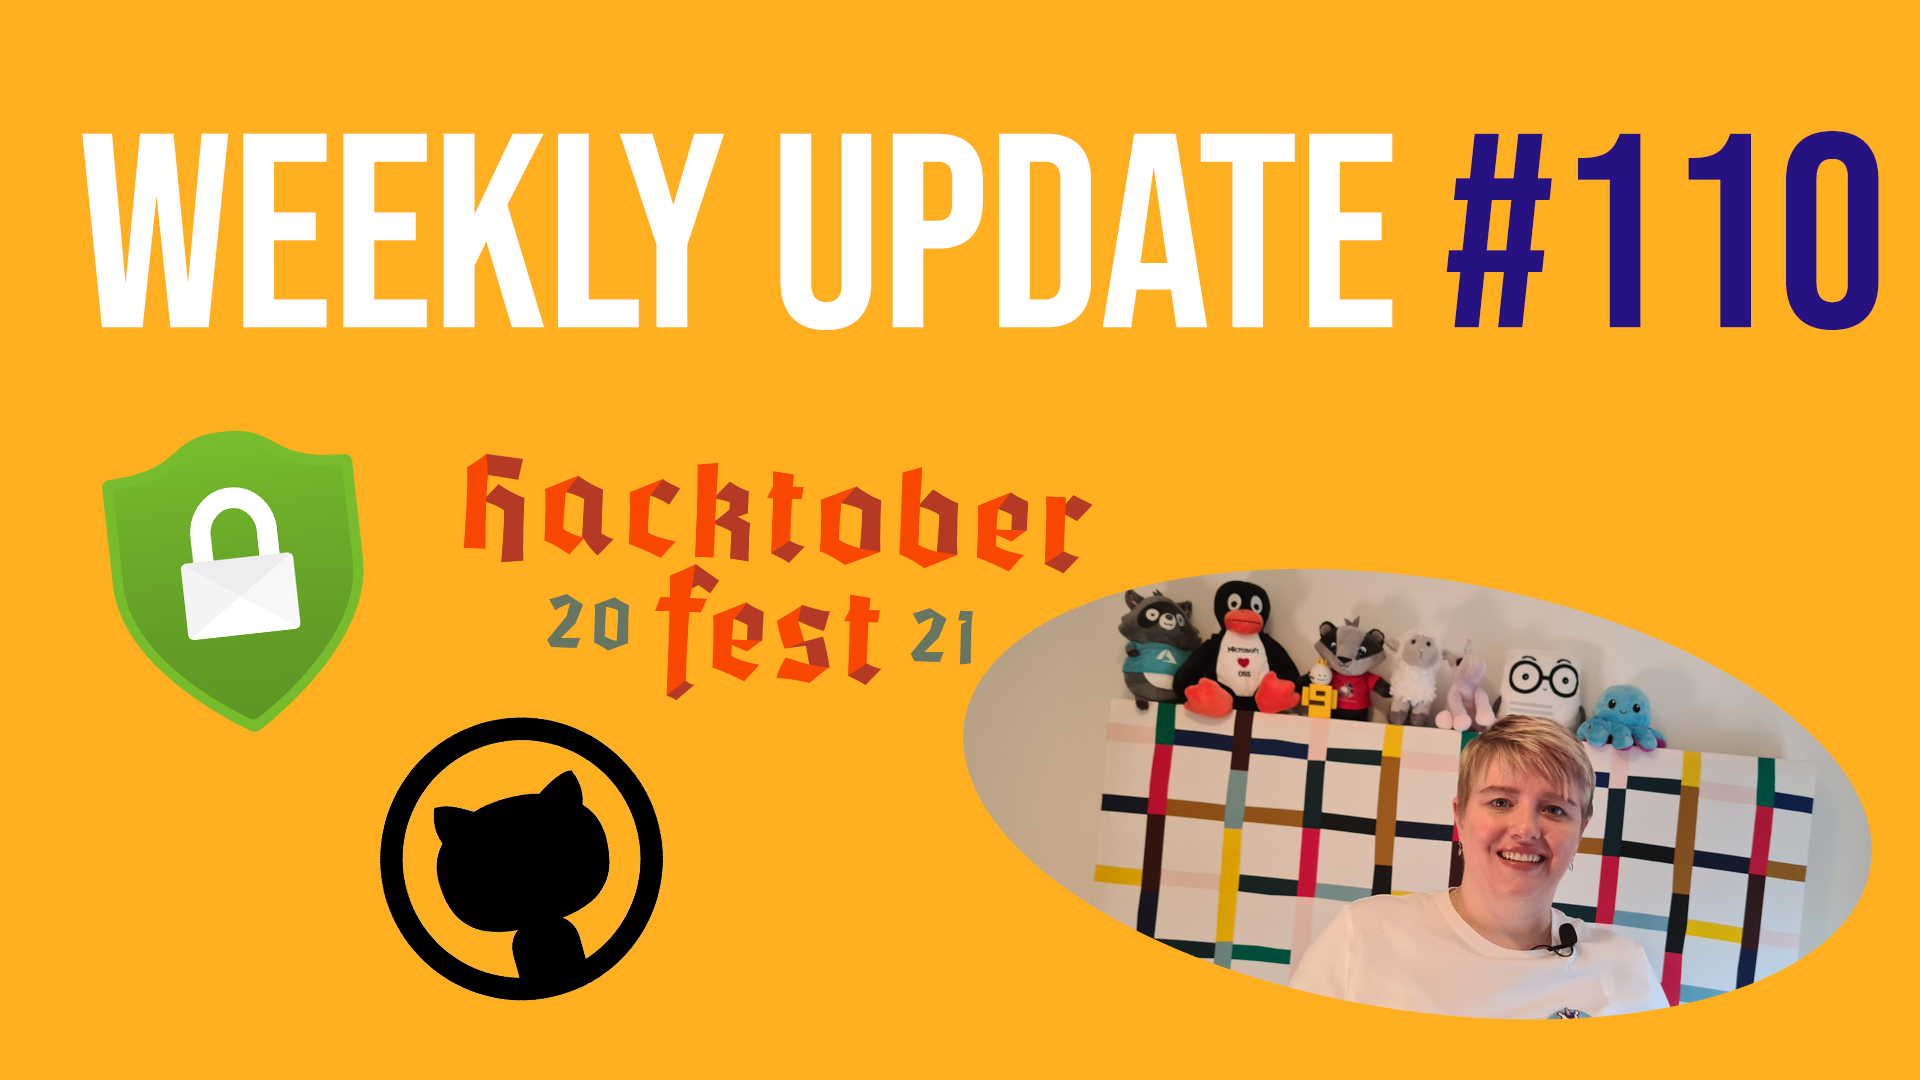 Weekly Update #110 - GitHub, Network Security Dashboard, Availability Zones and Hacktoberfest!